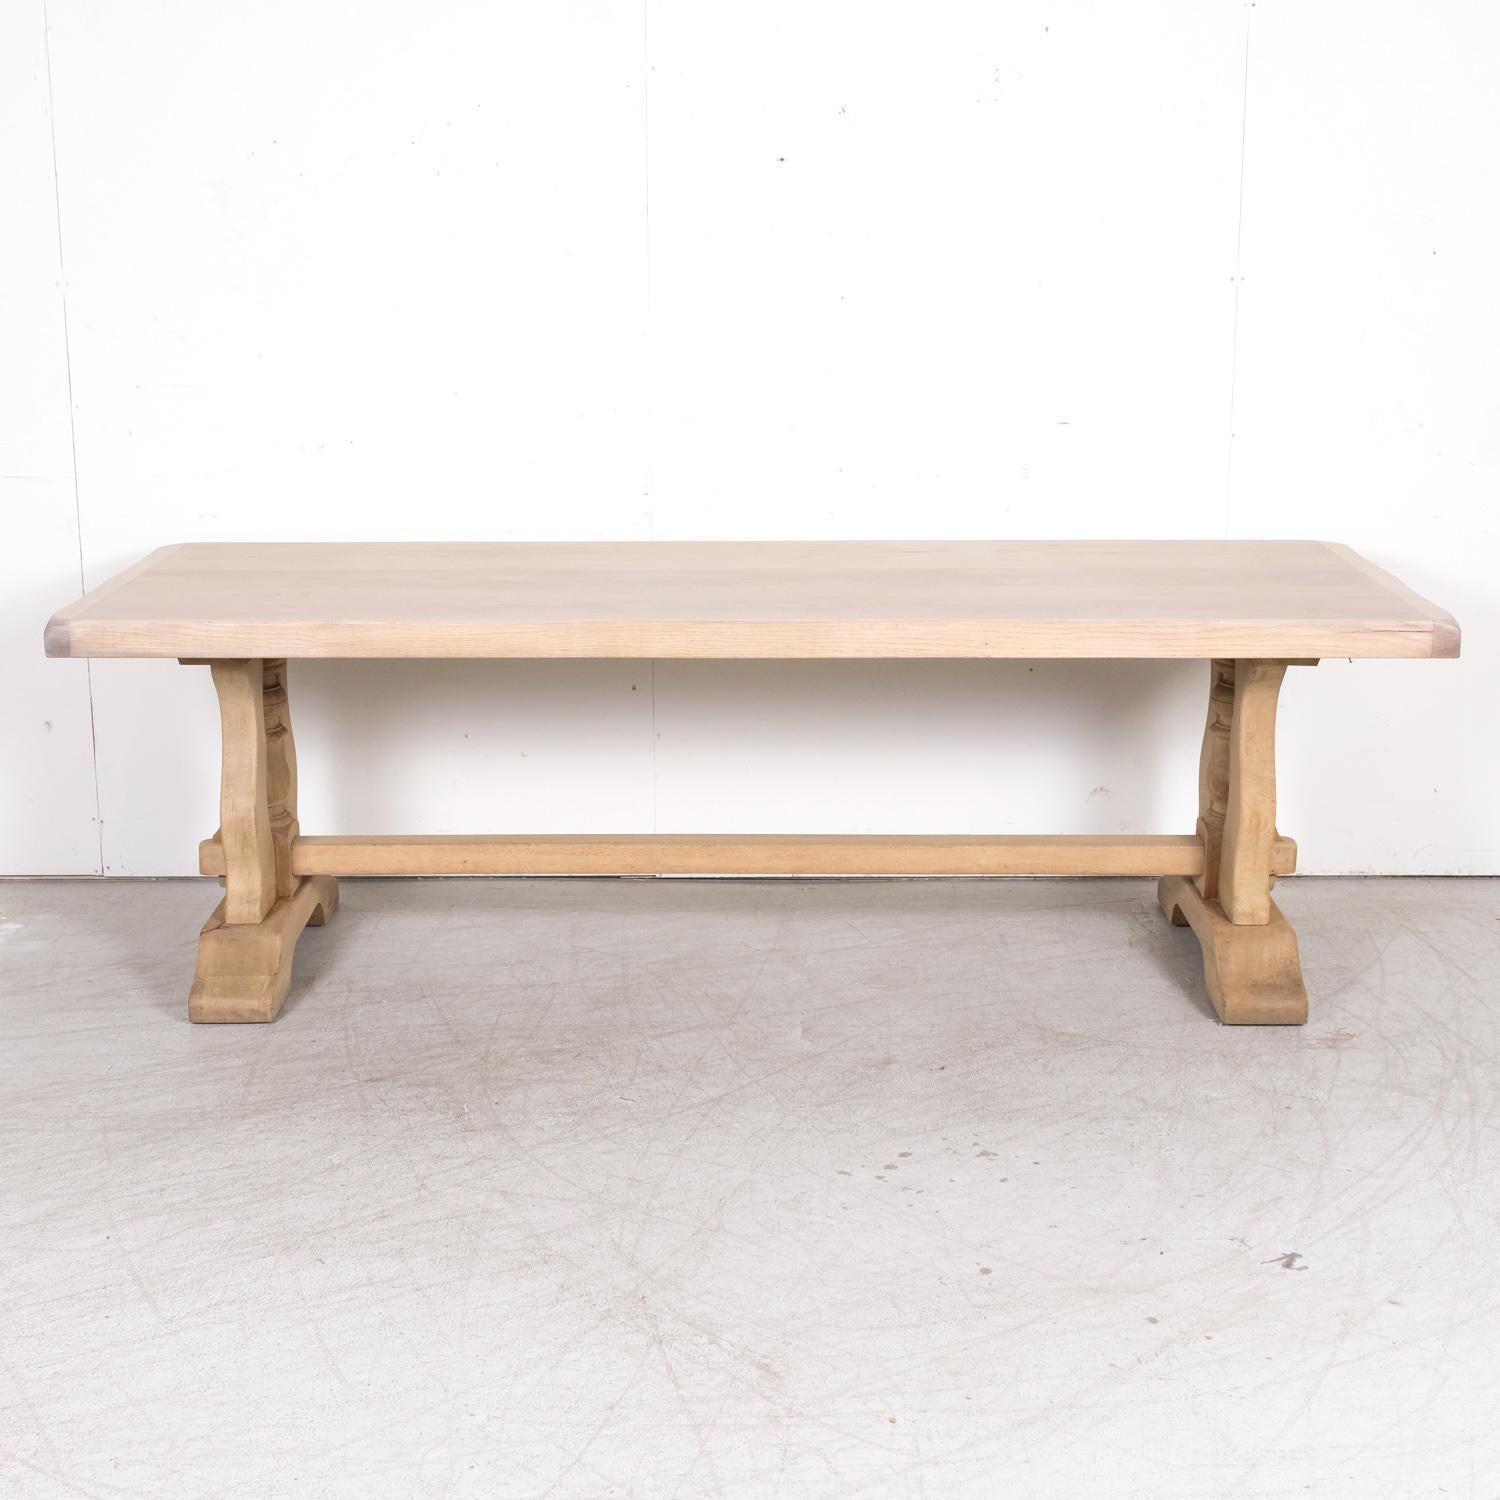 A handsome antique French monastery trestle dining table, circa 1920s, handcrafted with precision and care of solid oak by talented artisans in the picturesque seaside town of Étretat, nestled along Normandy's Alabaster coast. Having a rectangular